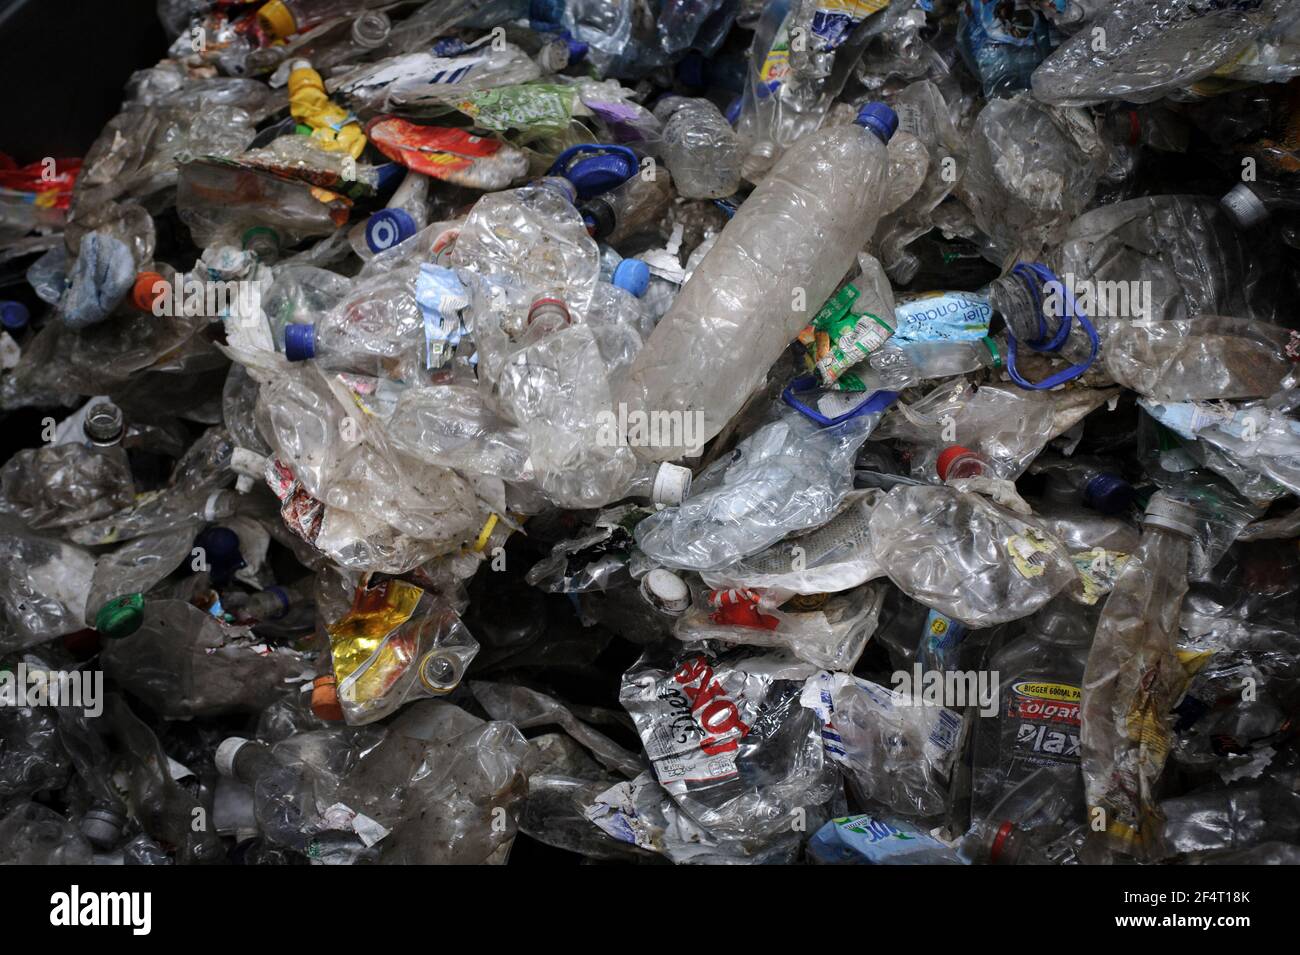 Plastic waste at a materials recycling facility in the UK. Stock Photo